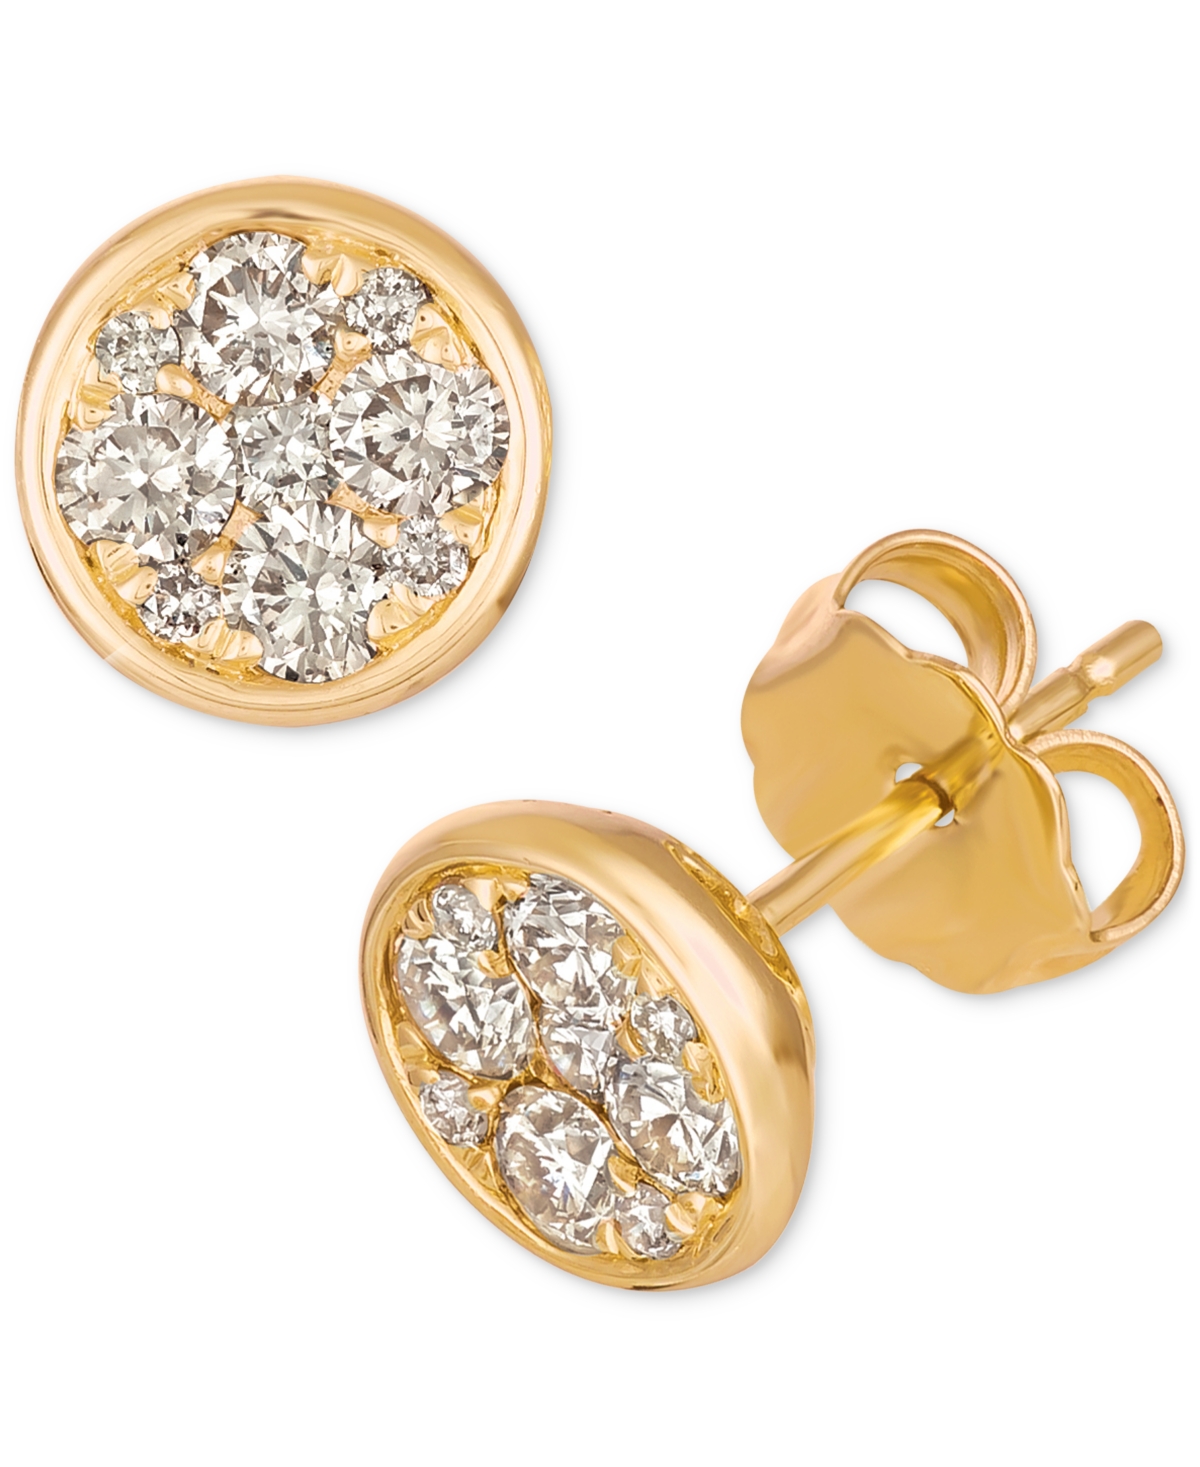 Strawberry & Nude Diamond Cluster Stud Earrings (1/2 ct. t.w.) in 14k Rose Gold (Also Available in Yellow Gold) - Yellow Gold